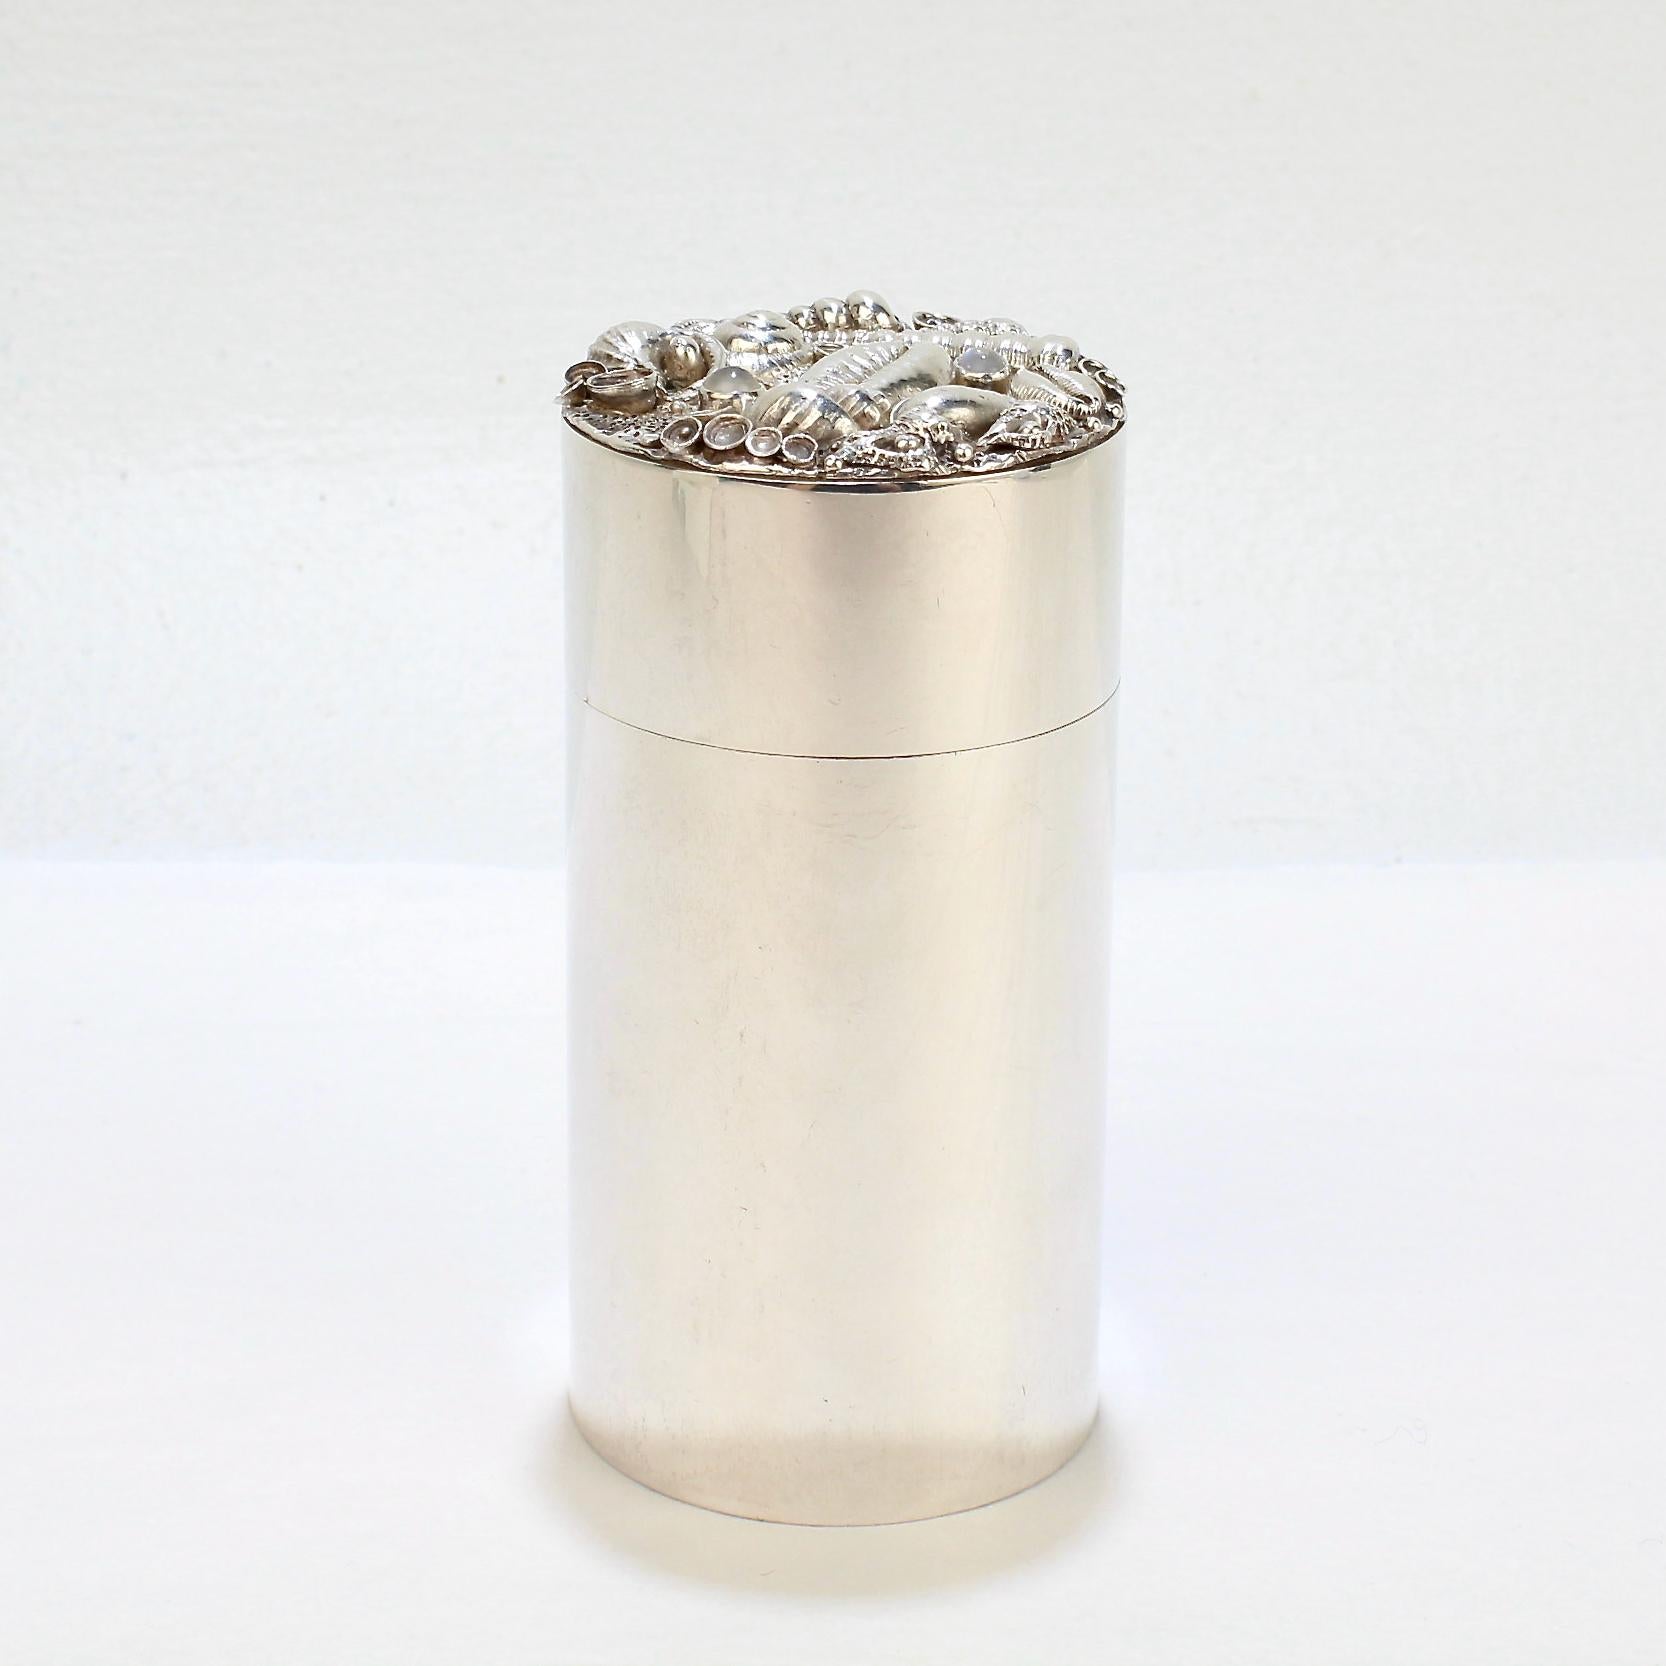 A very fine cylindrical sterling silver box by Jocelyn Burton.

The box's lid is richly encrusted with miniature silver sea shells and bezel set with 2 moonstone cabochon gemstones. 

The sides of the box are thick-gauged and the lid slides on